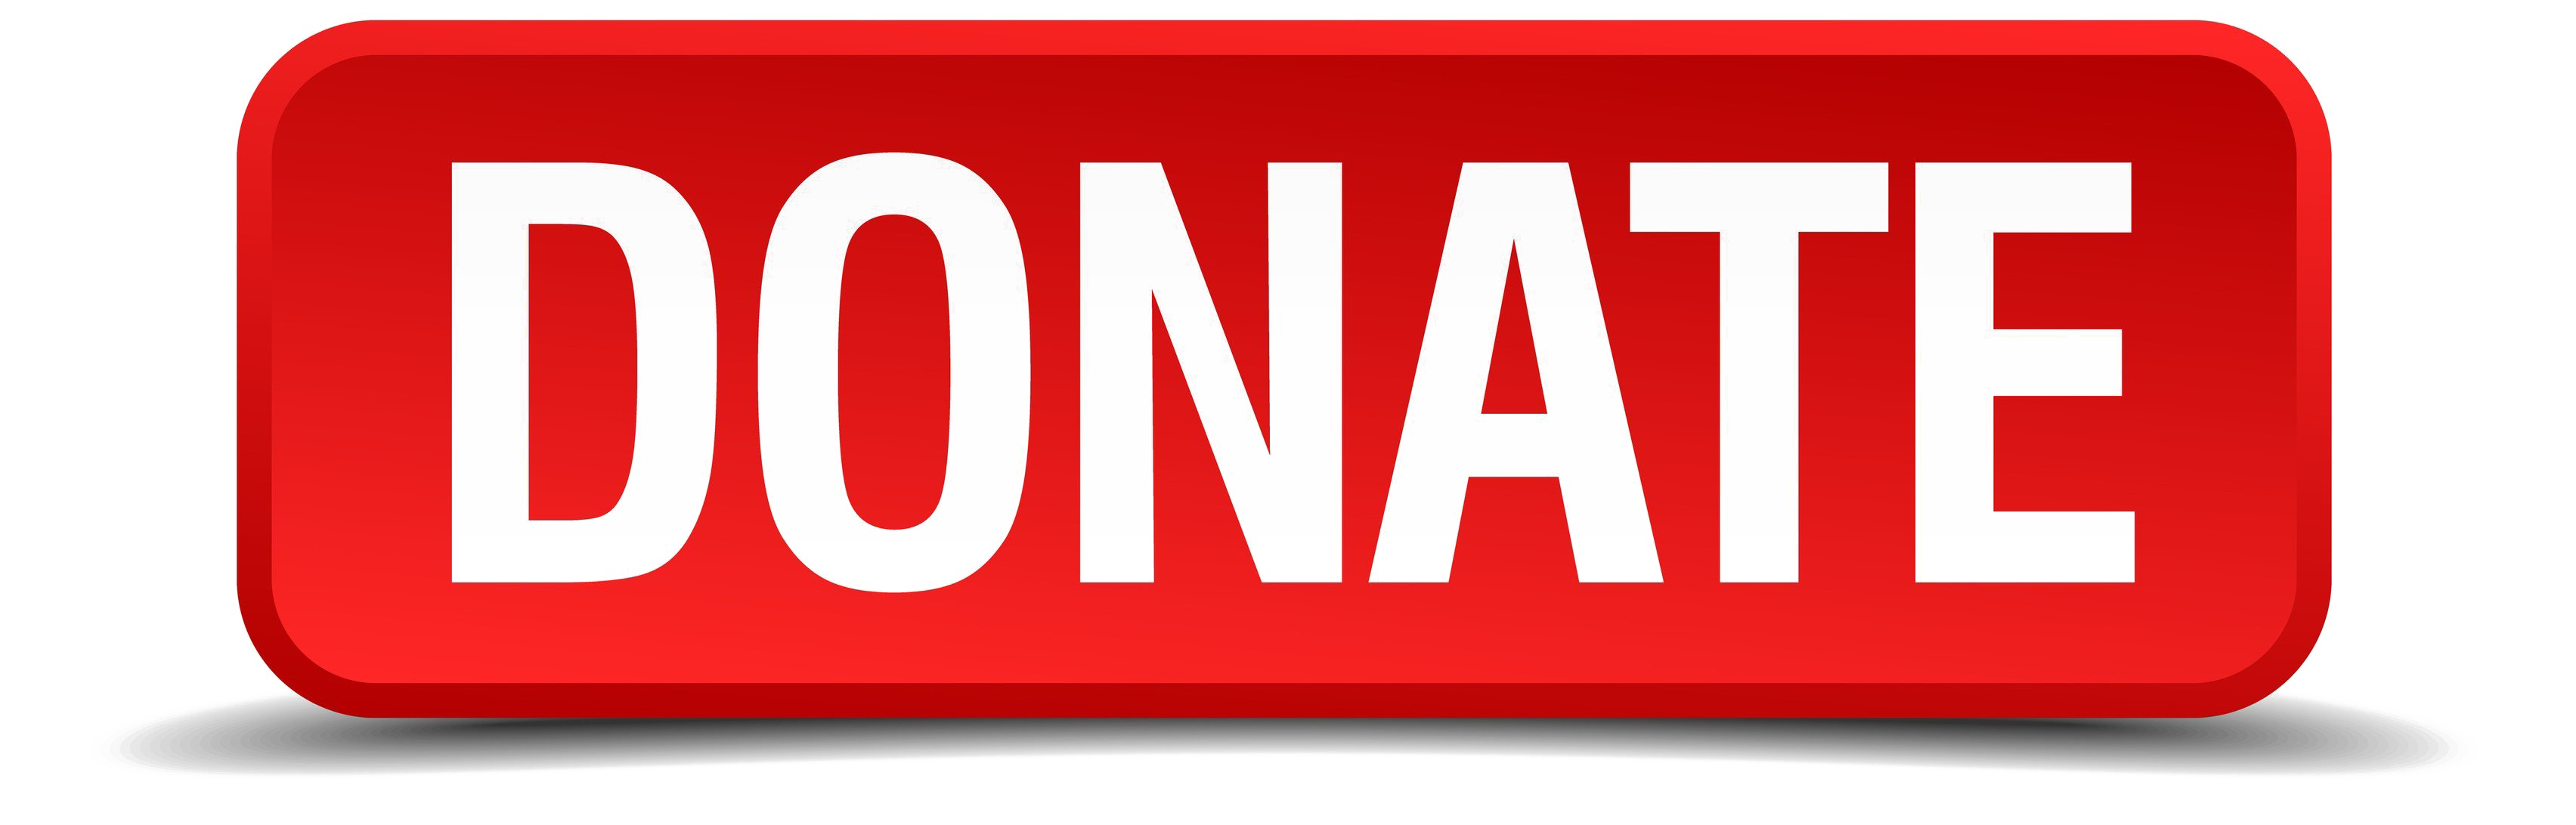 Big red DONATE button